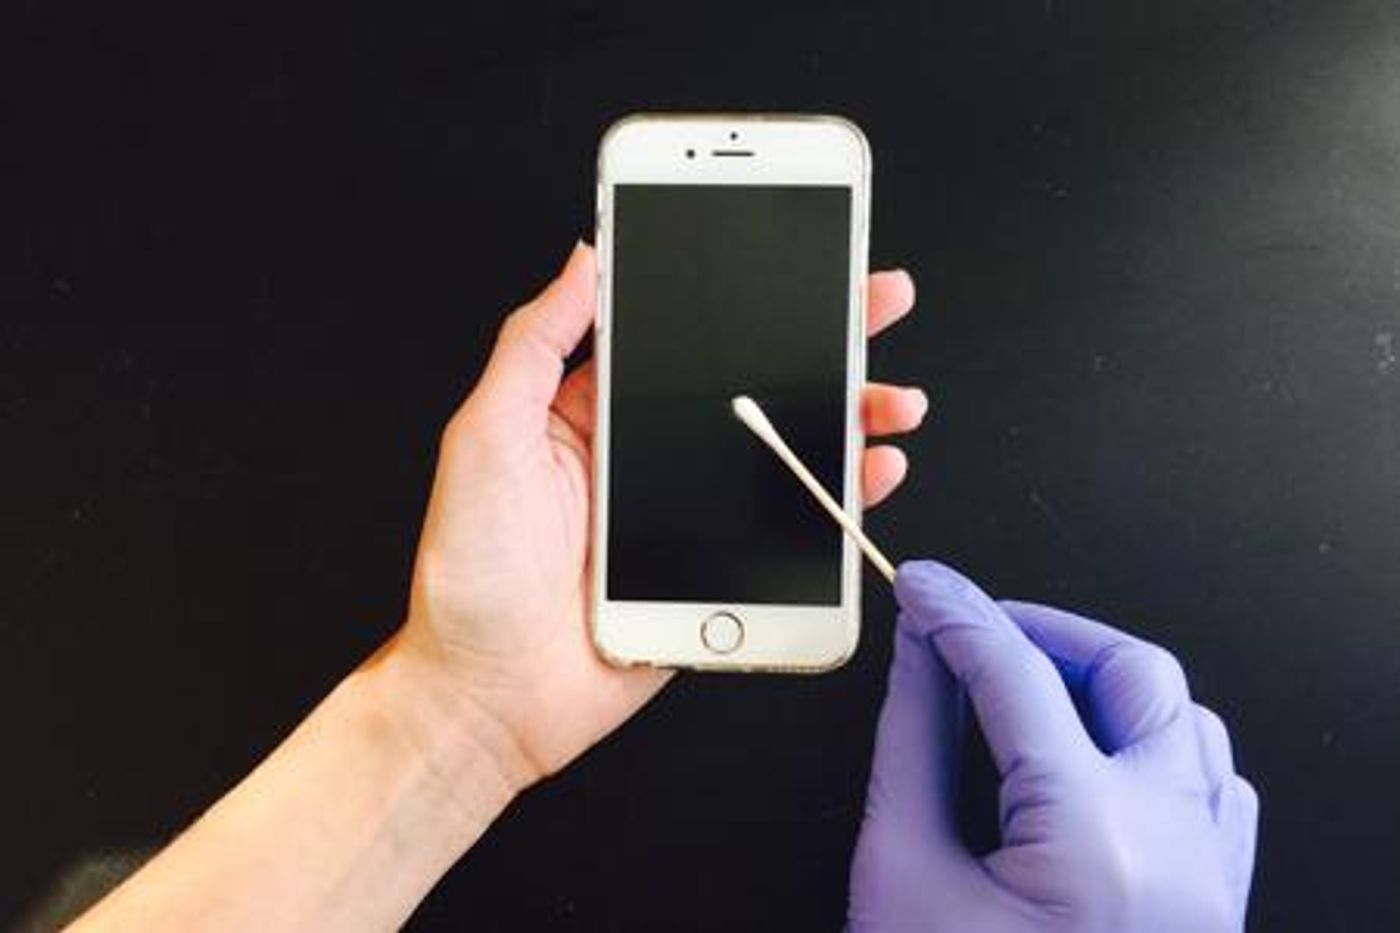 Molecular traces left on cell phones allowed UC San Diego researchers to construct lifestyle sketches of each phone's owner. / Credit: Amina Bouslimani and Neha Garg